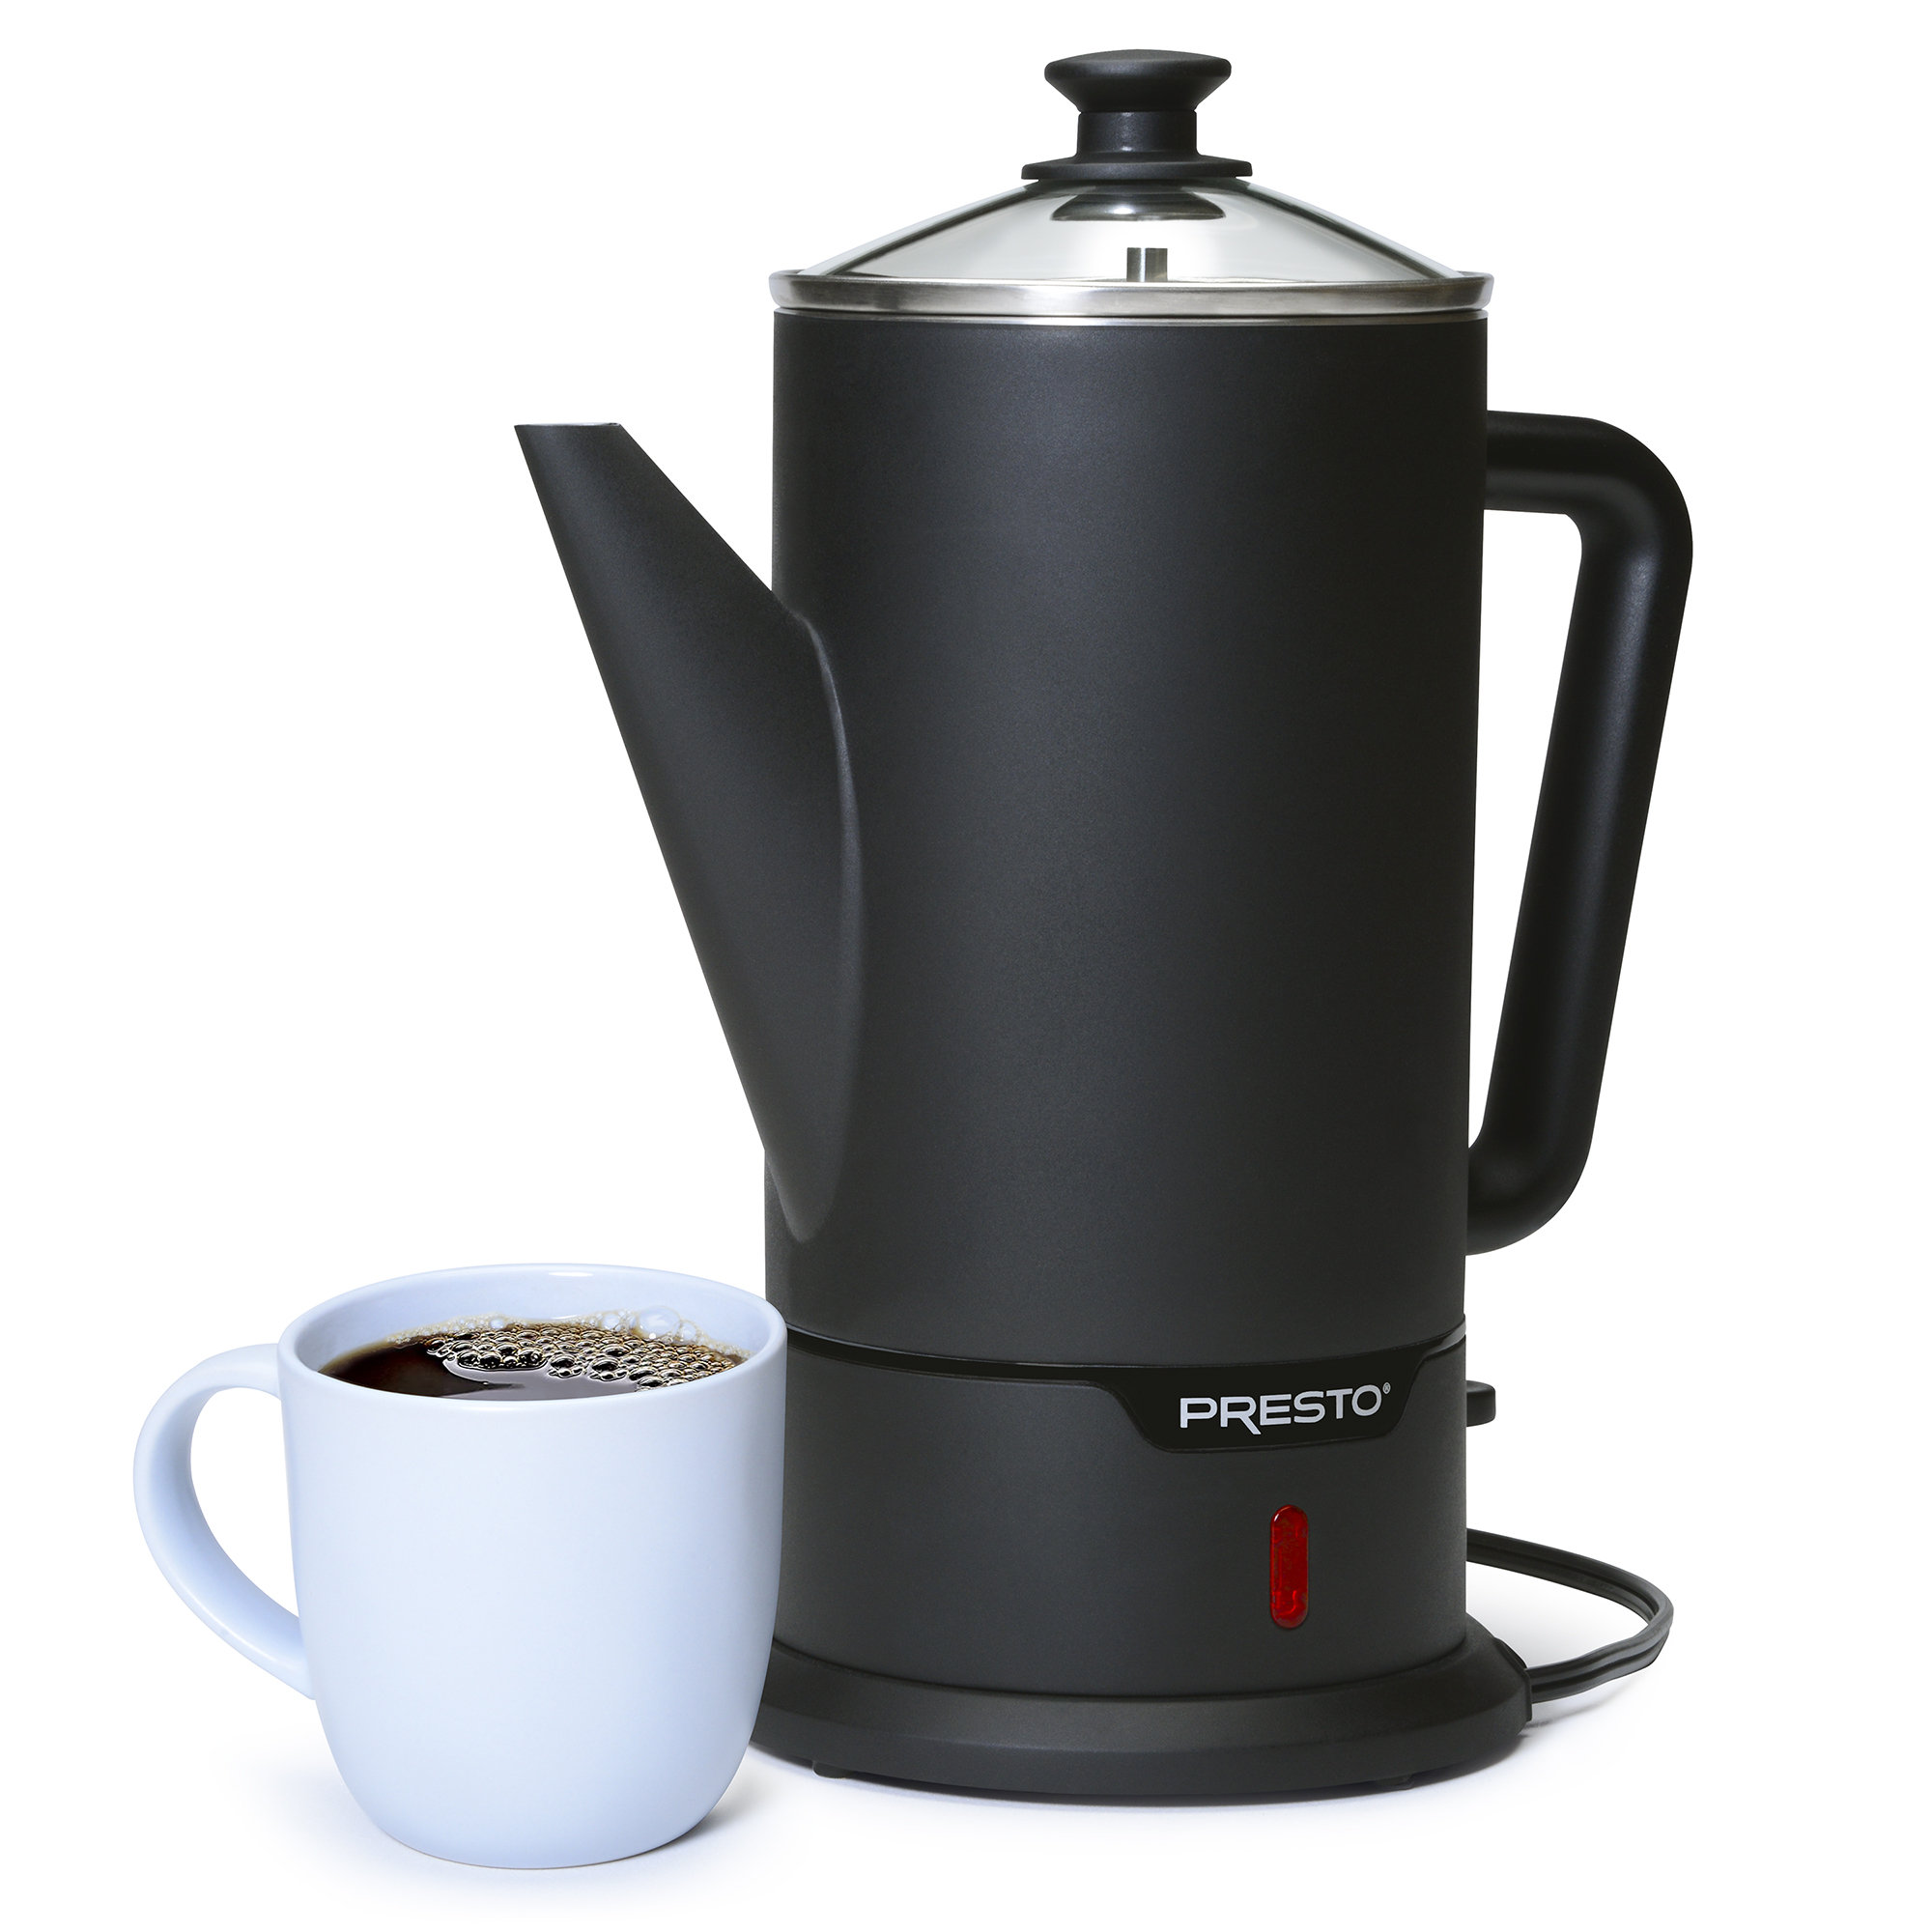 12 Volt COFFEE MAKER - household items - by owner - housewares sale -  craigslist